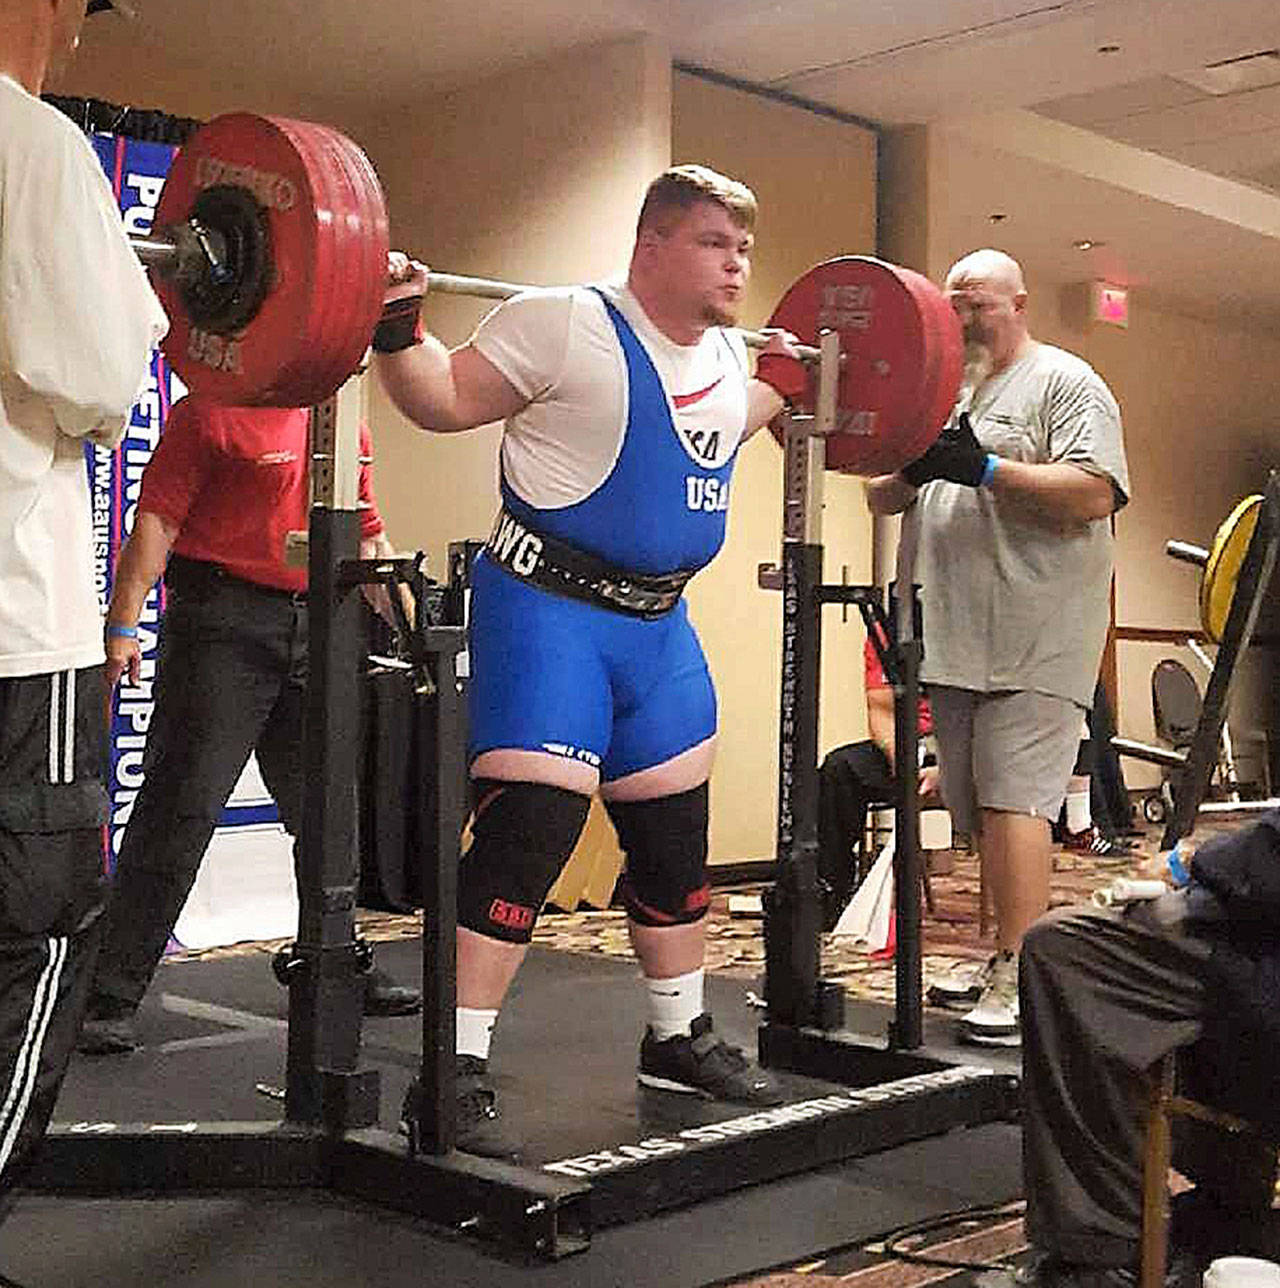 Aberdeen resident Skyler Murray prepares for his squat attempt at the AAU World Championships in Laughlin, Nevada in September. (Submitted photo)